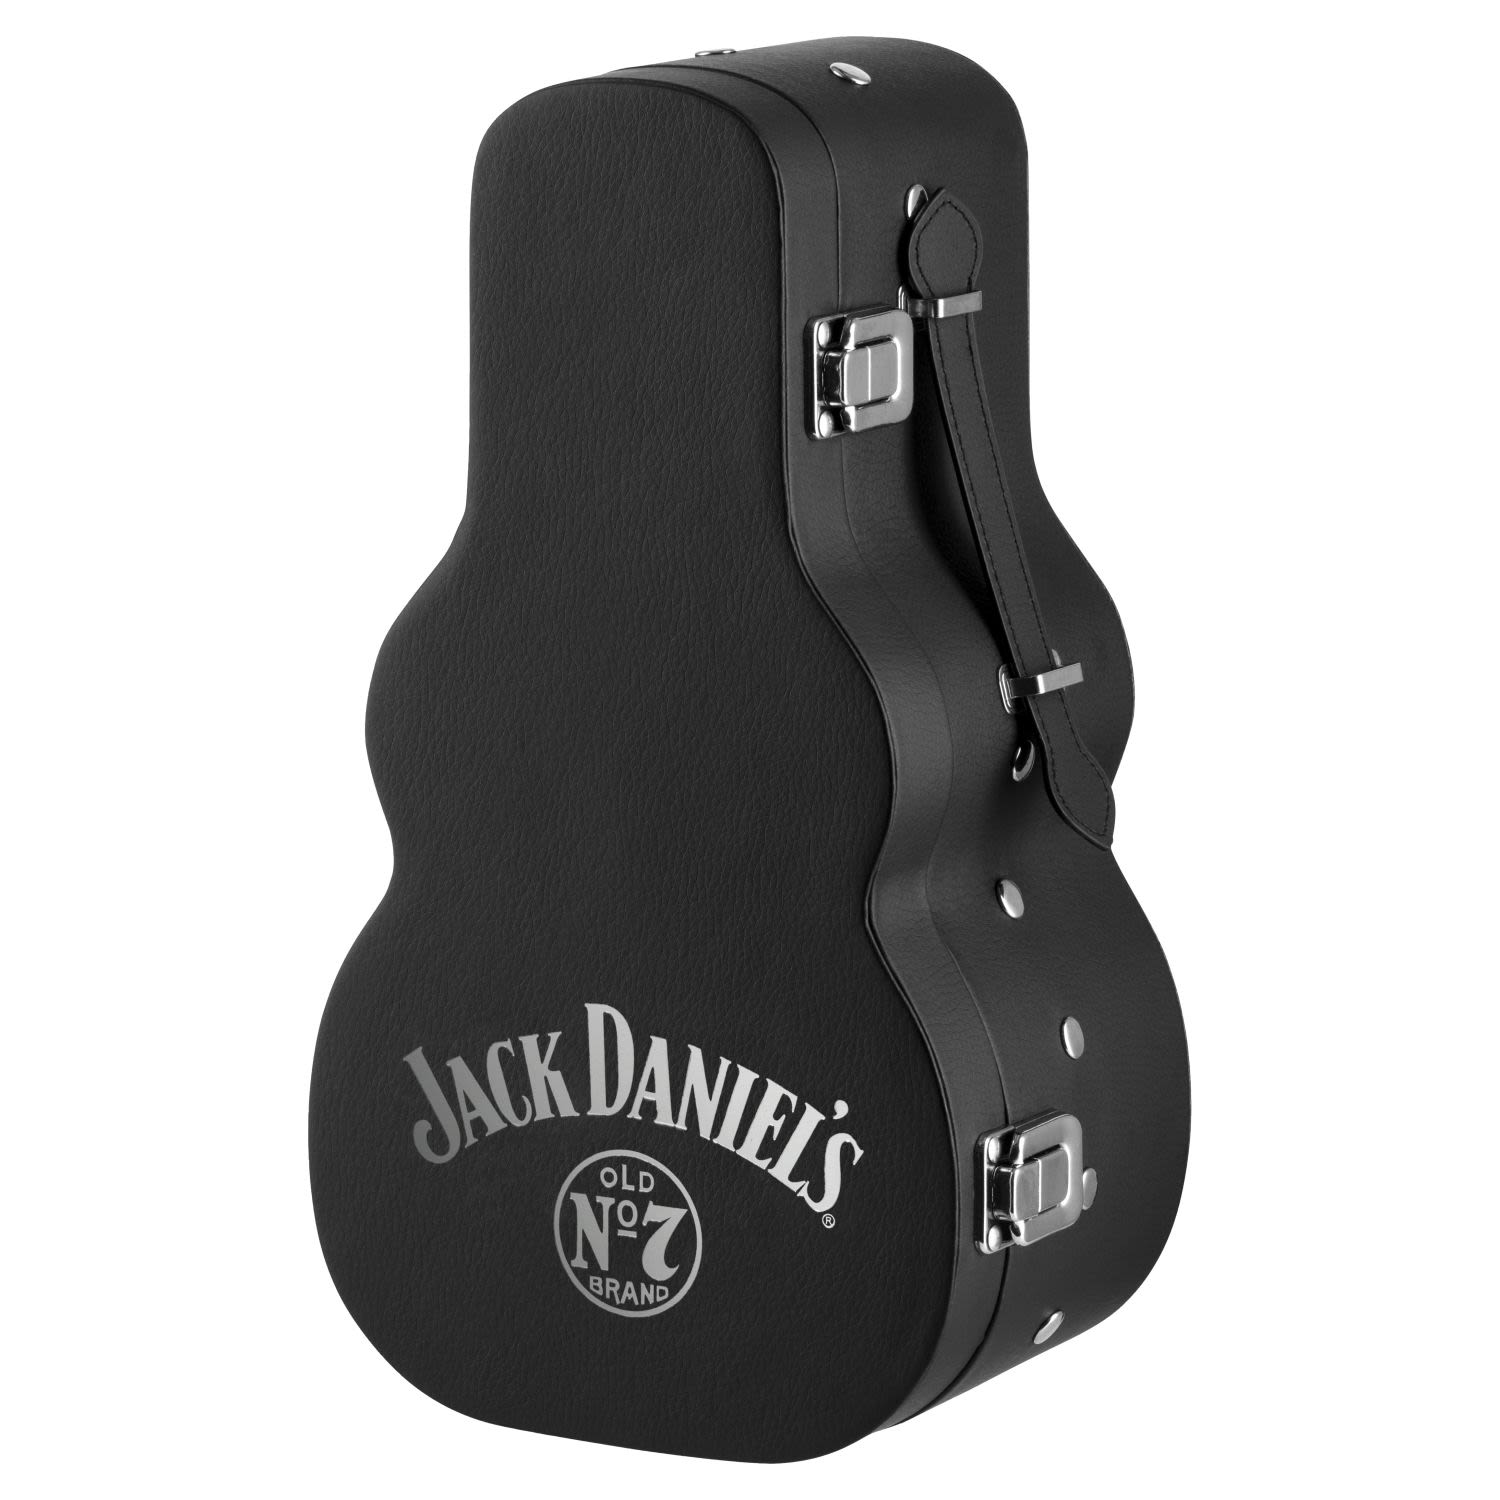 Jack Daniel's Old No. 7 Tennessee Whiskey + Guitar Case 700mL Bottle